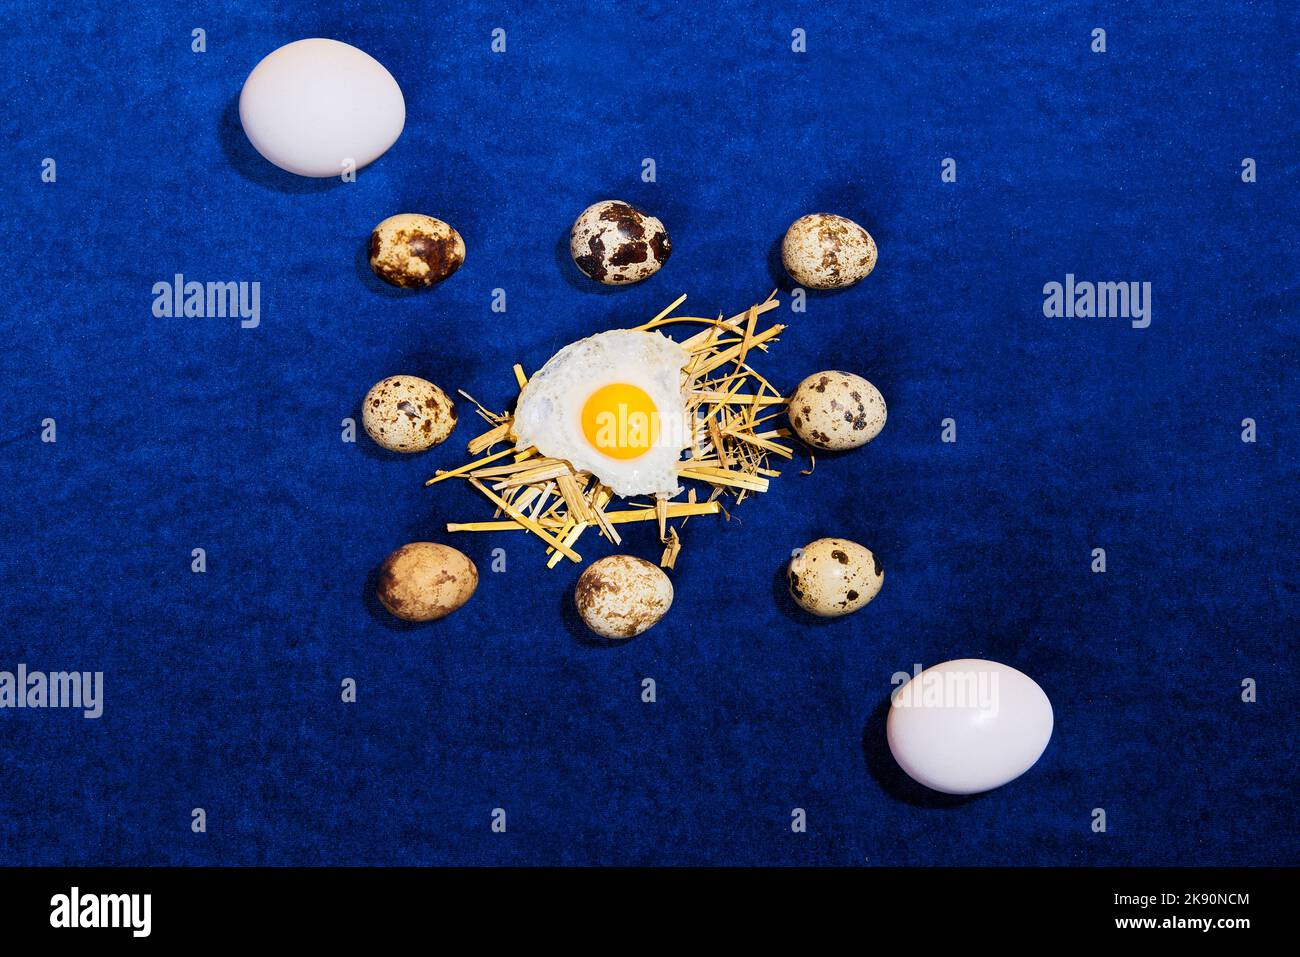 Food pop art photography. Composition with quail and chicken eggs on bright blue tablecloth. Retro style, colorful minimalism, art, creativity Stock Photo